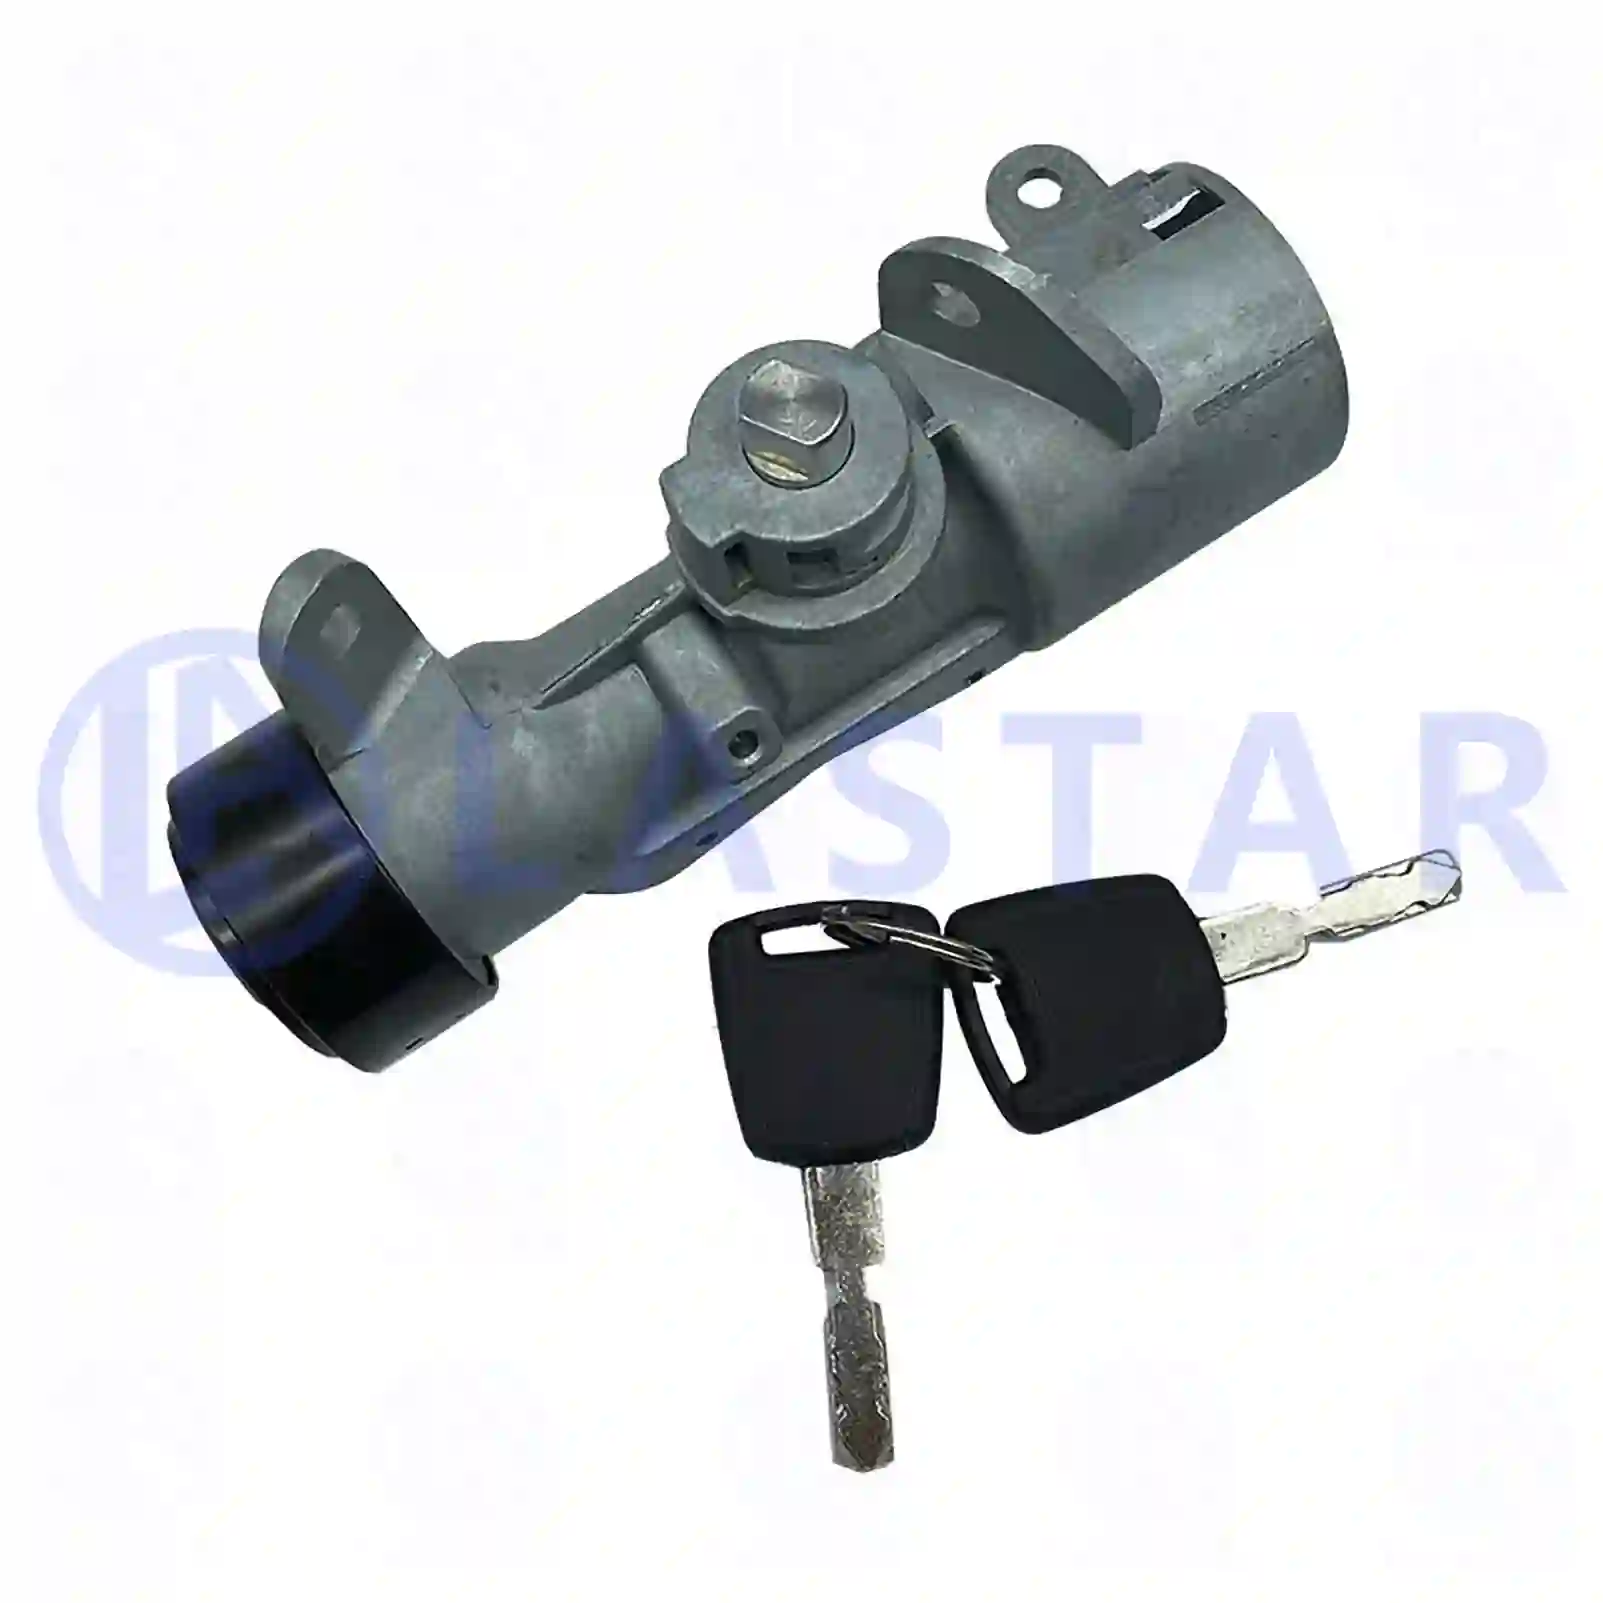 Steering lock, with ignition lock, 77706012, 1535125, ZG20157-0008 ||  77706012 Lastar Spare Part | Truck Spare Parts, Auotomotive Spare Parts Steering lock, with ignition lock, 77706012, 1535125, ZG20157-0008 ||  77706012 Lastar Spare Part | Truck Spare Parts, Auotomotive Spare Parts